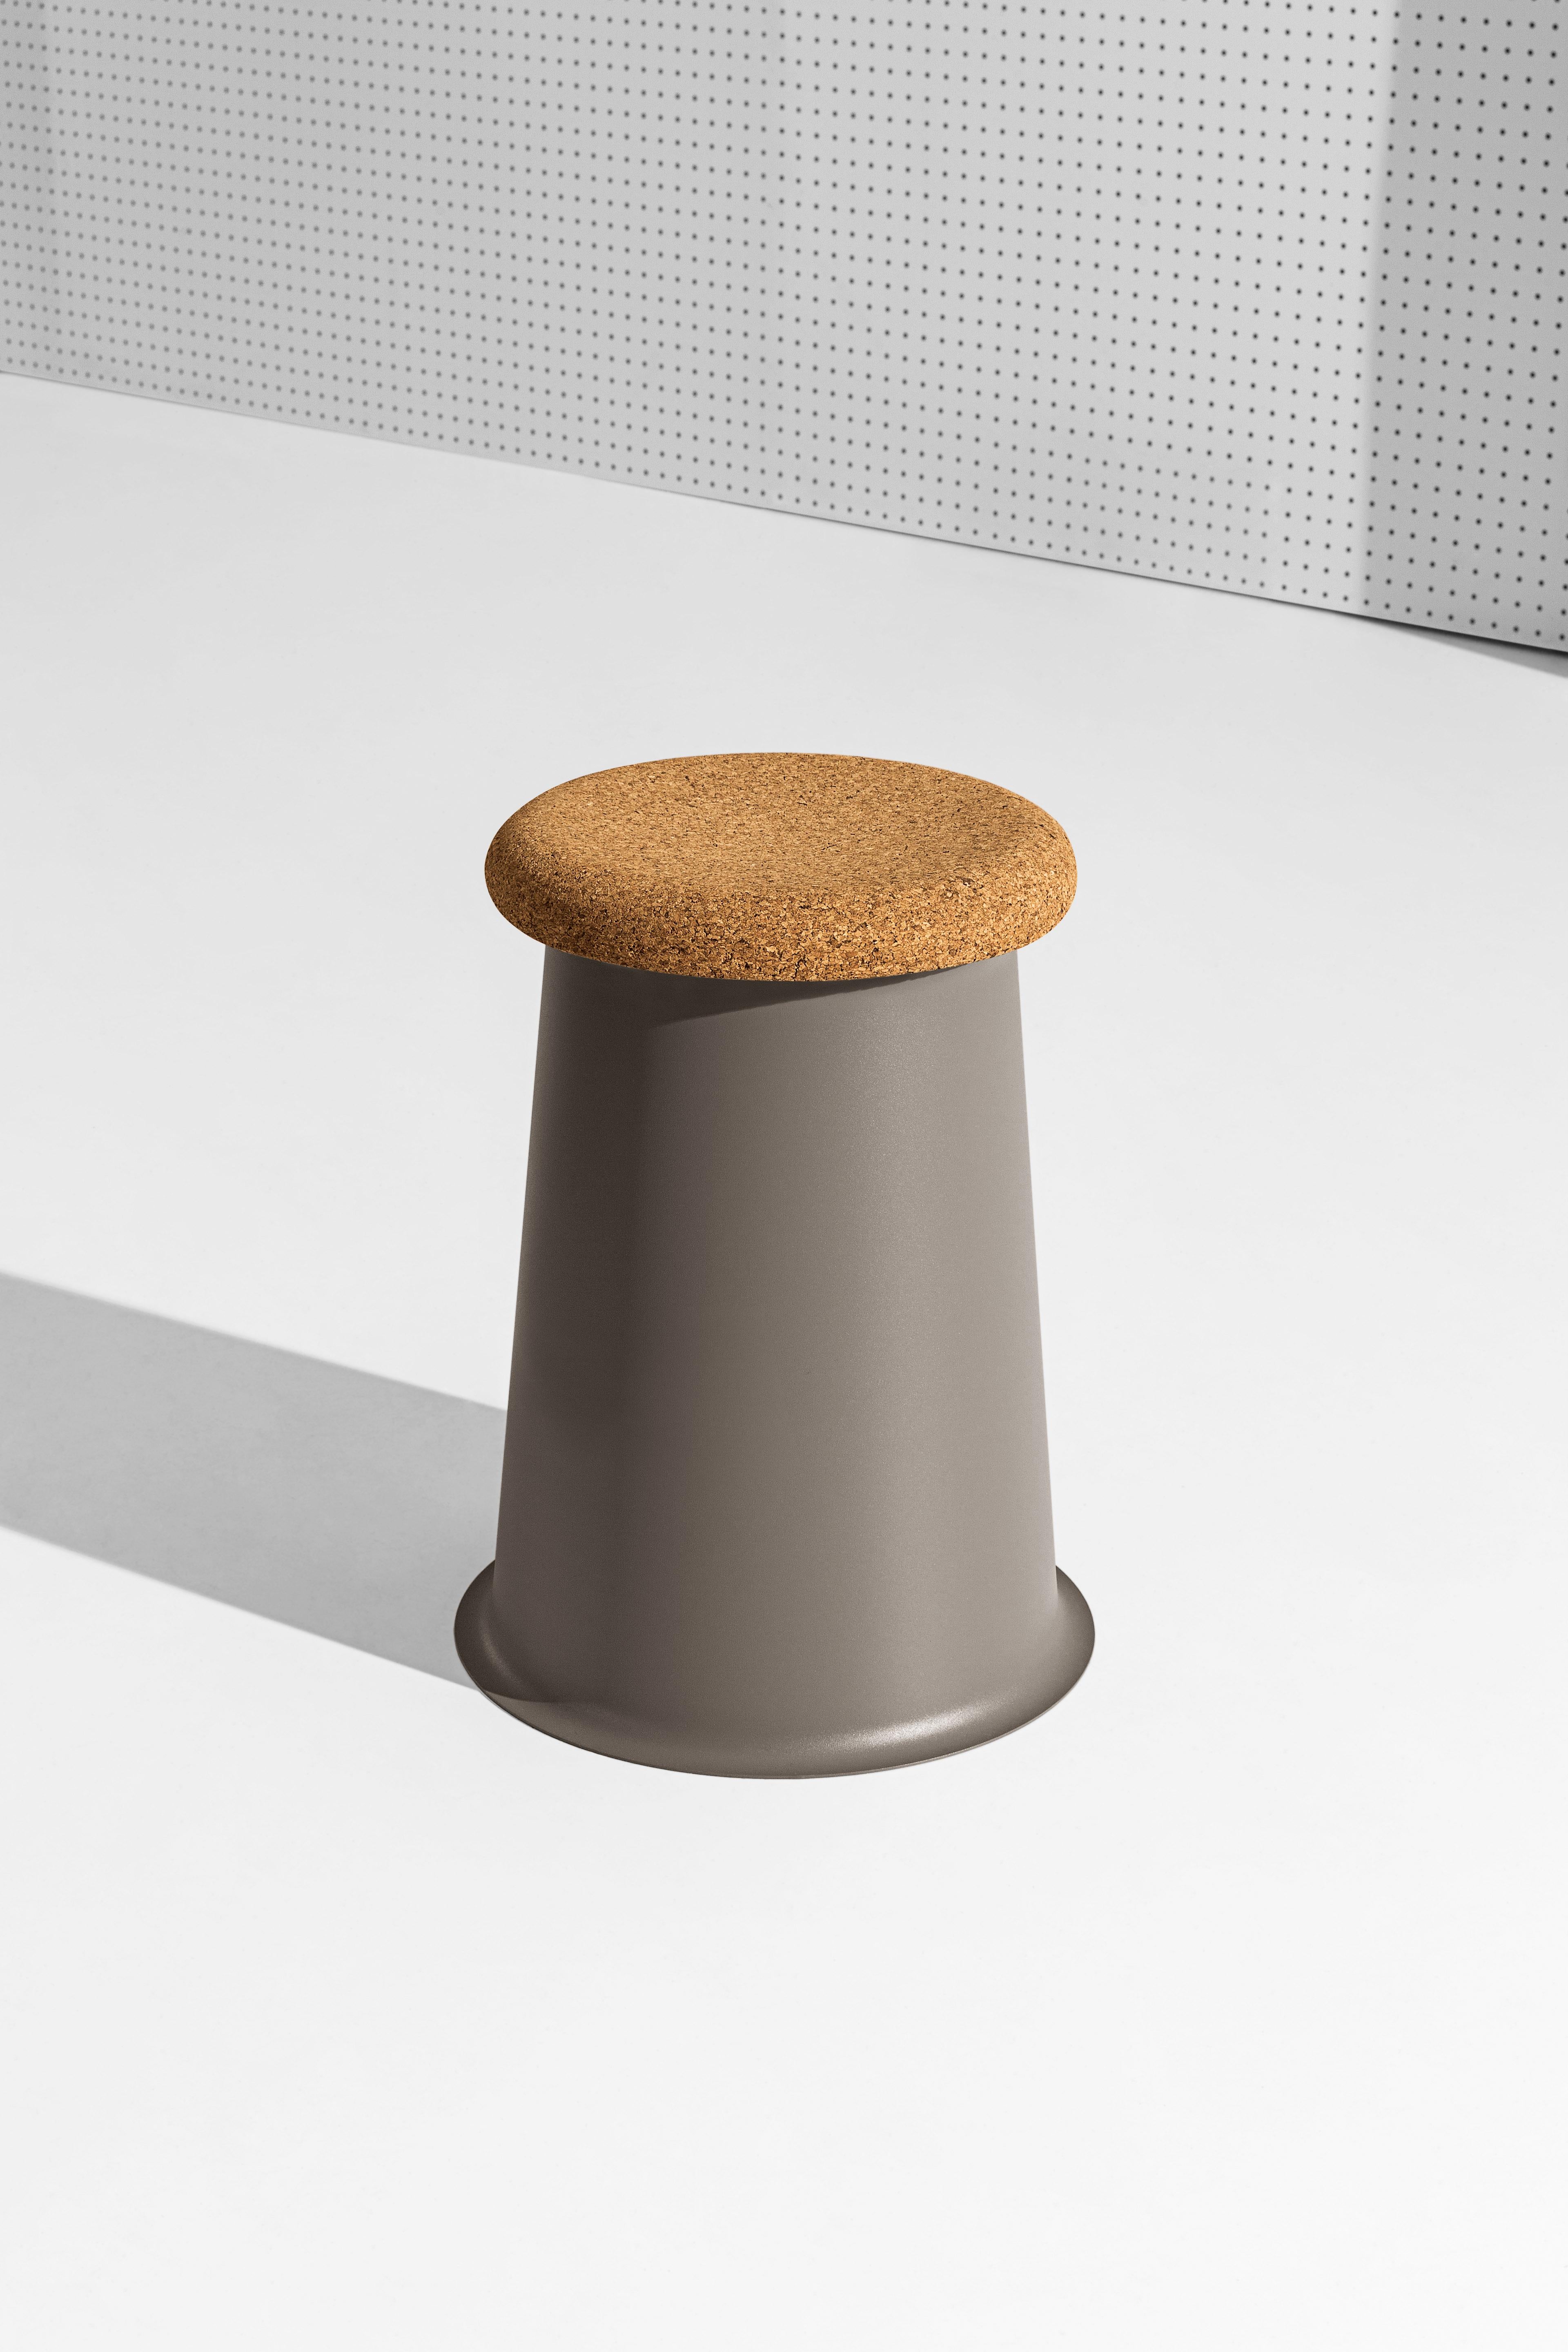 Siit Stool, Black Lacquered Metal Base and Natural Cork Seat by Discipline Lab In New Condition For Sale In Biancade, IT